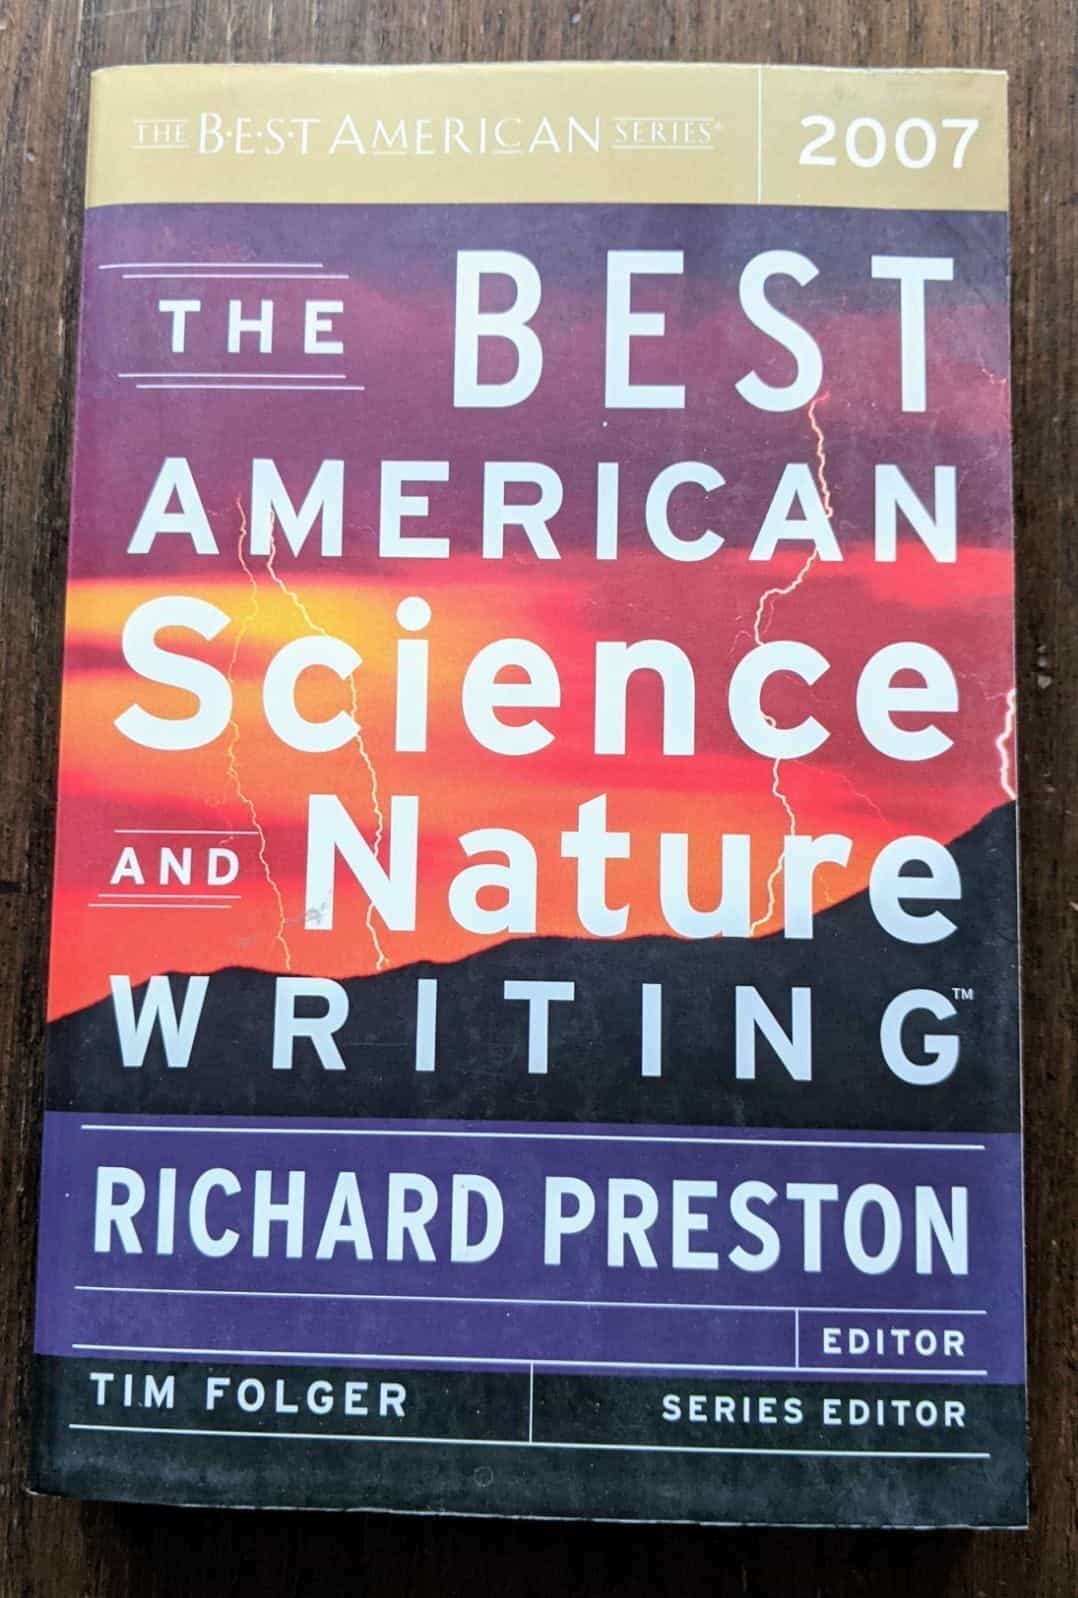 The Best American Science And Nature Writing by Richard Preston Book